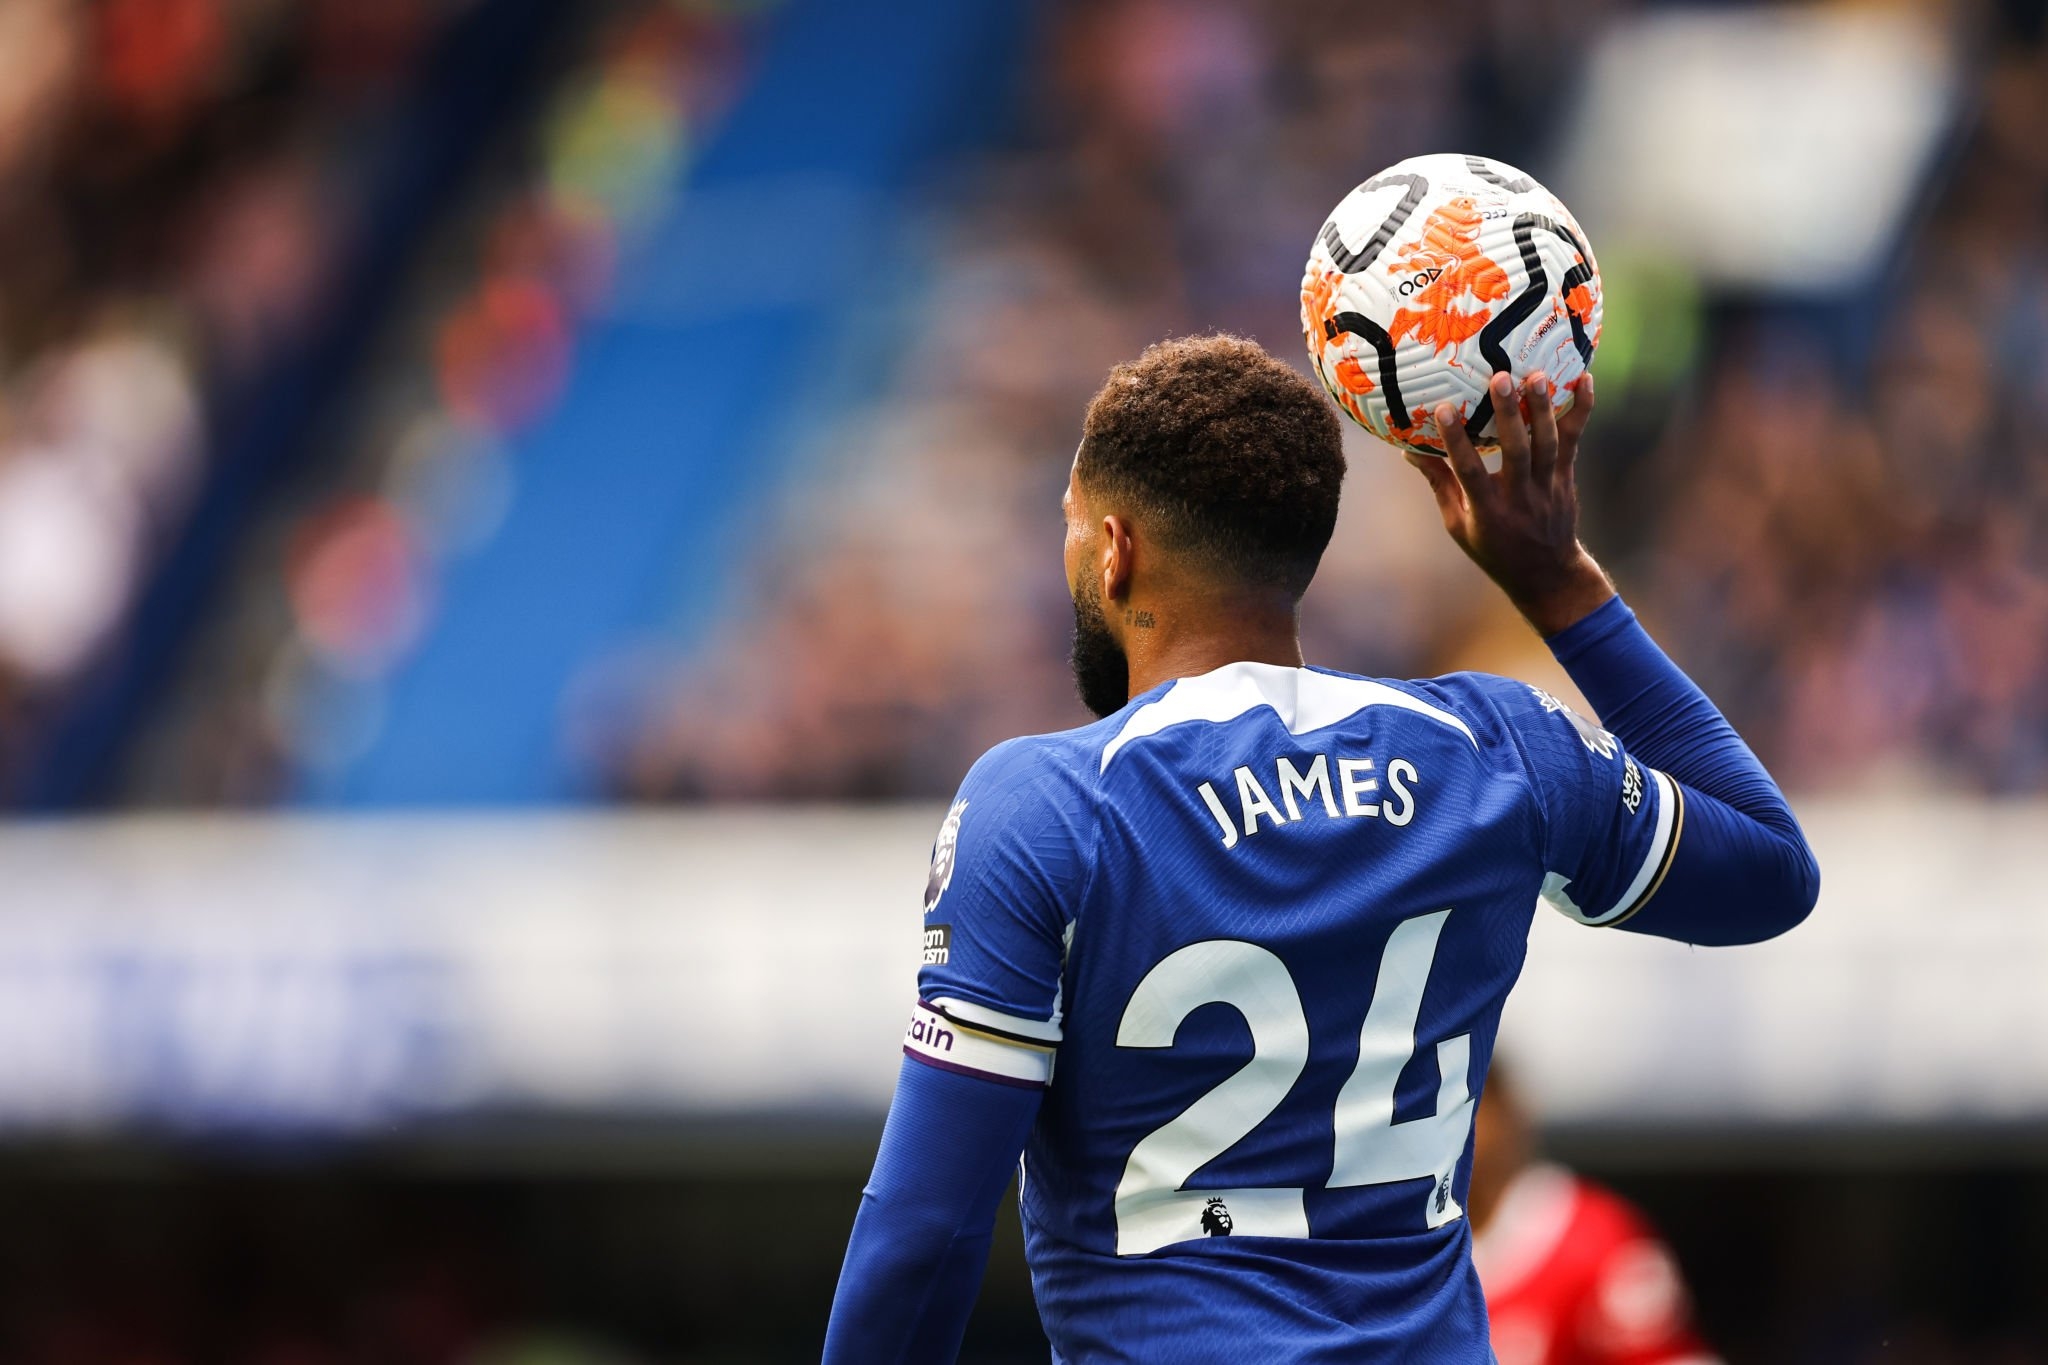 Former Chelsea player believes he knows why Chelsea made Reece James captain » Chelsea News